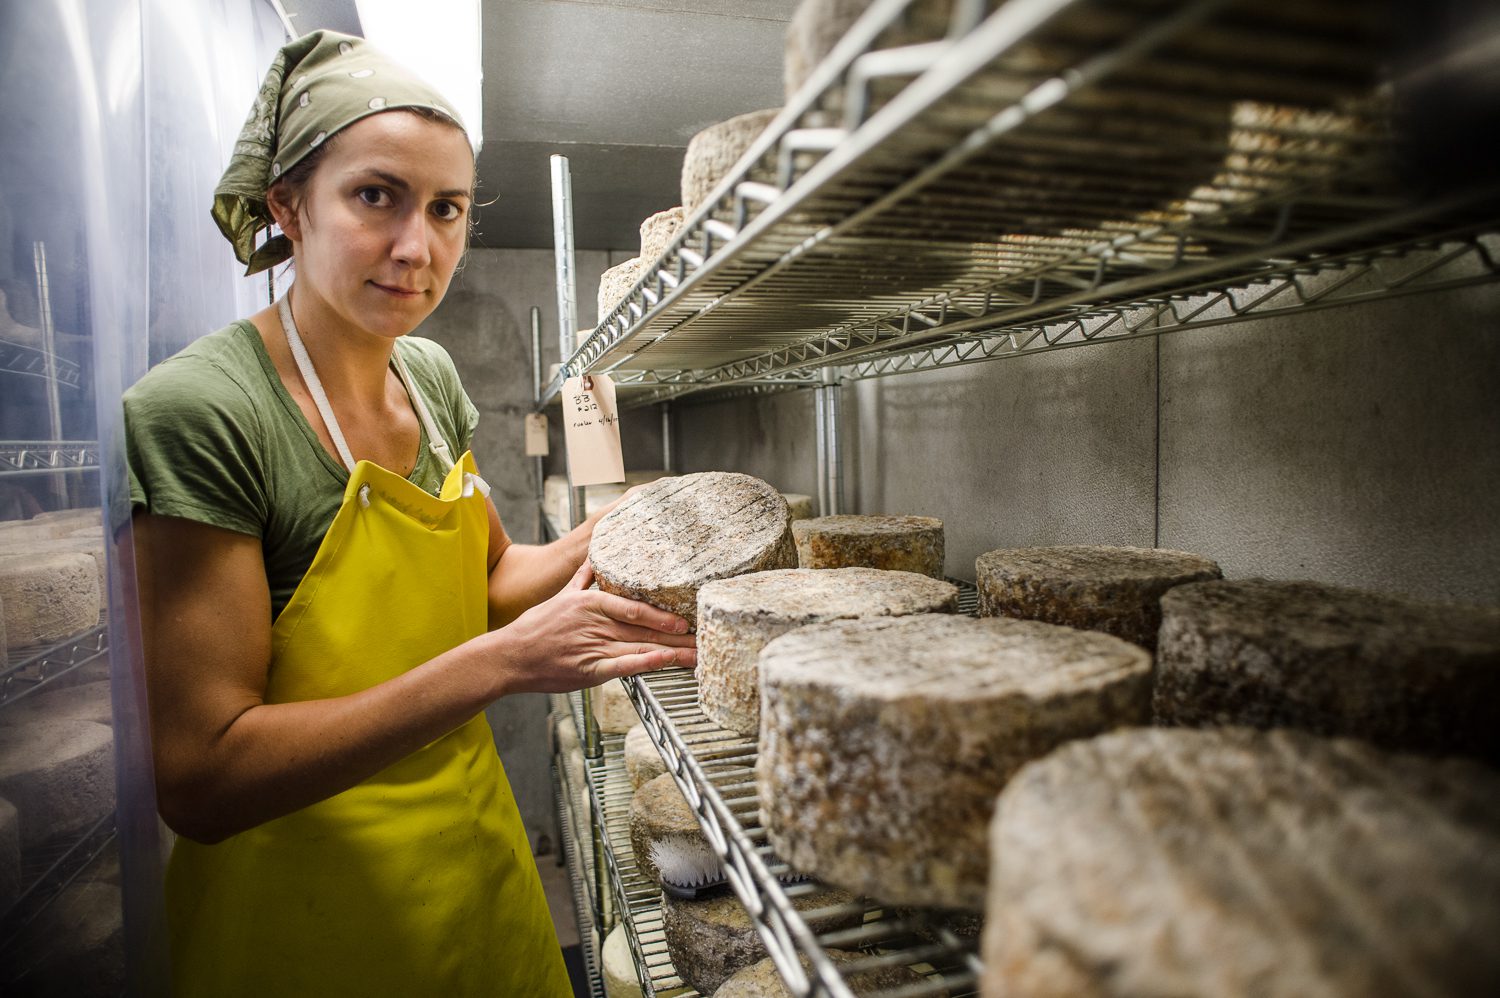 Seeking Part-Time Cheesemaking Assistant